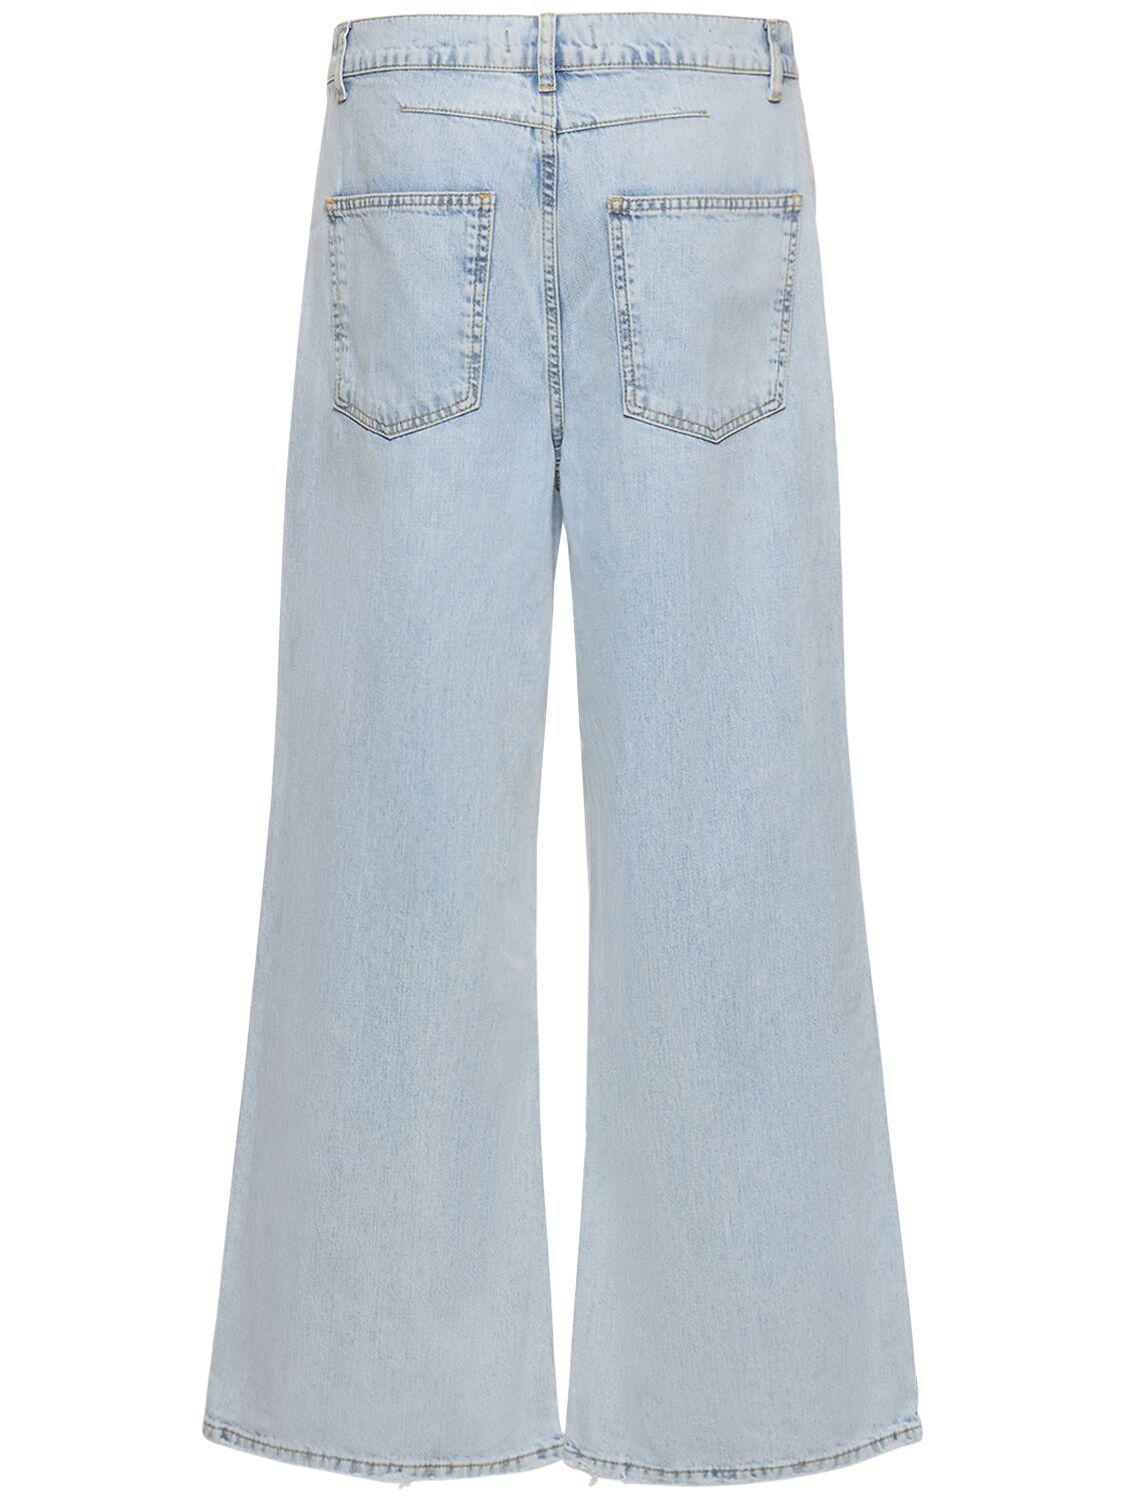 Jaded London Colossus Busted Bleach Wash Flared Jeans in Blue for